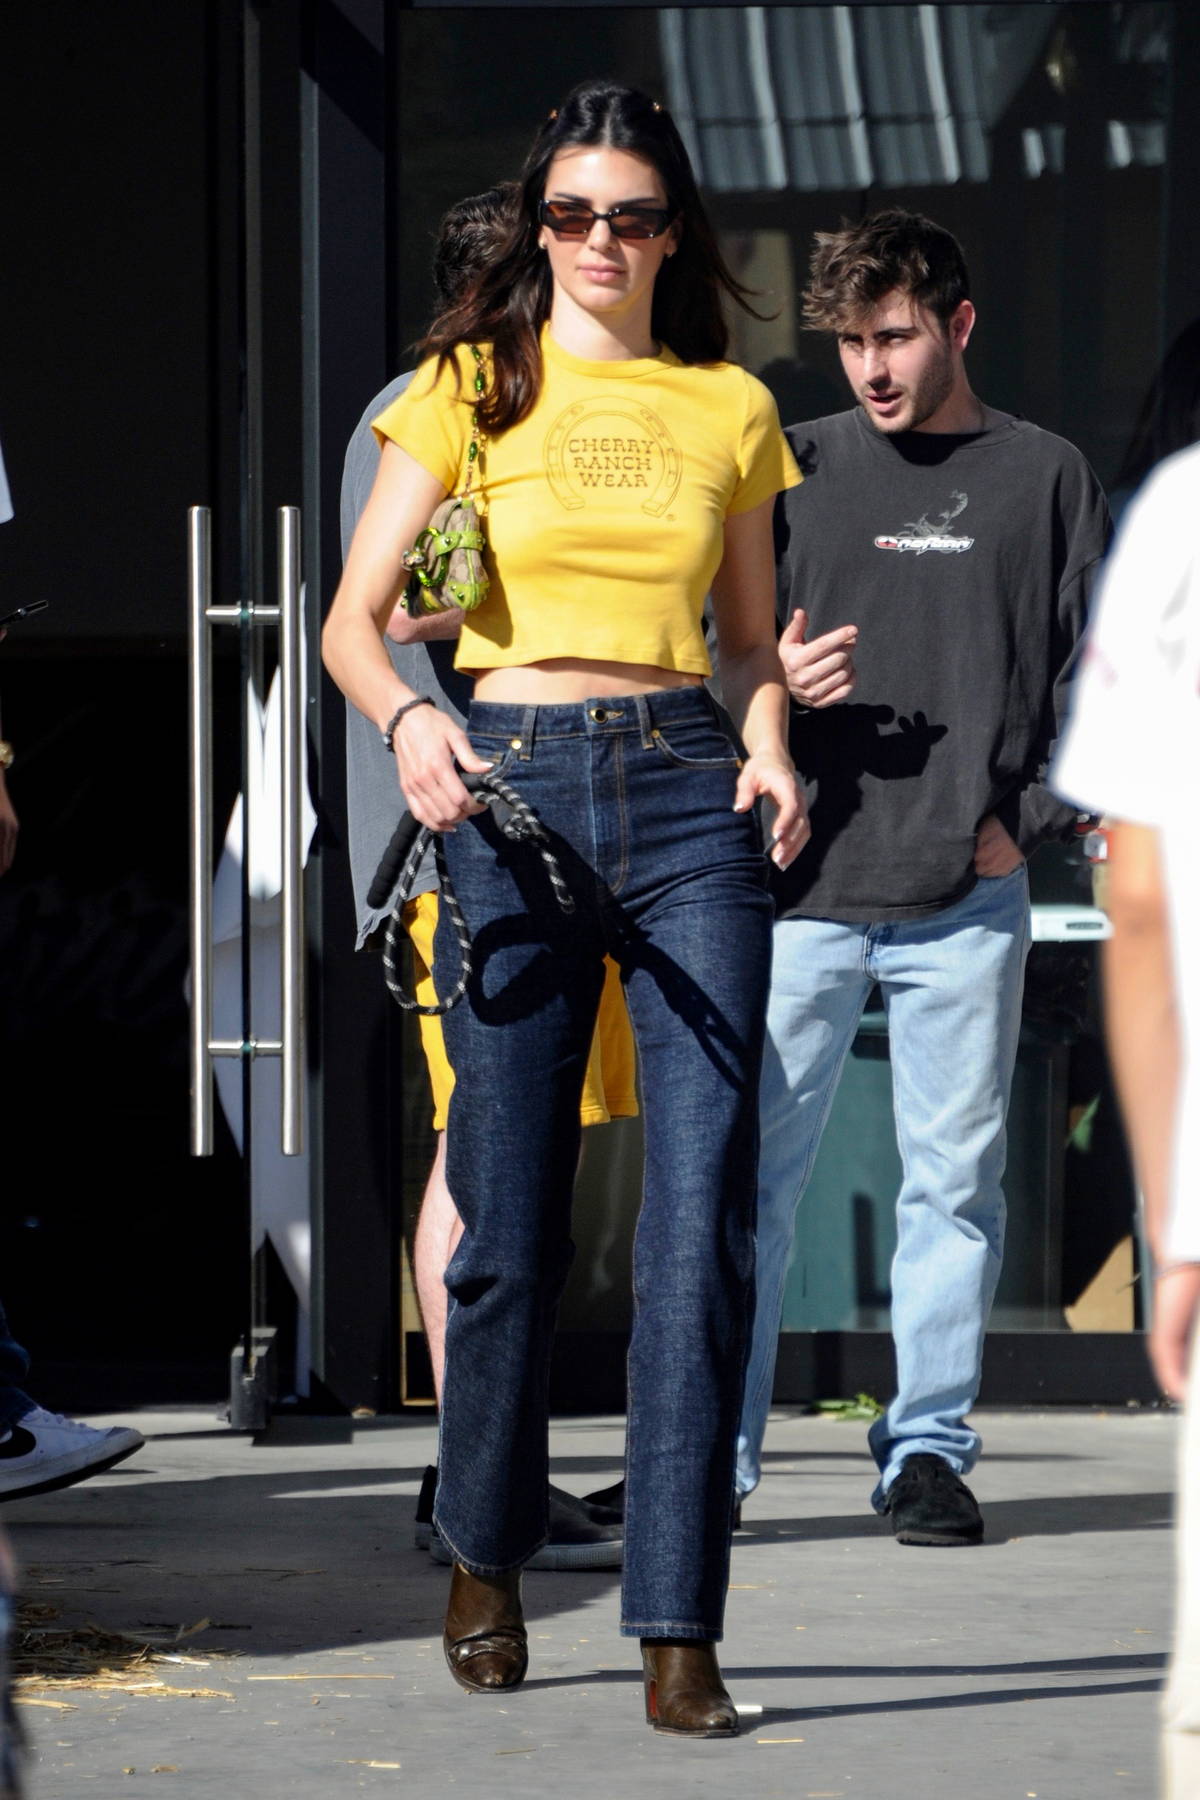 Kendall Jenner looks cute in a yellow crop top and jeans while